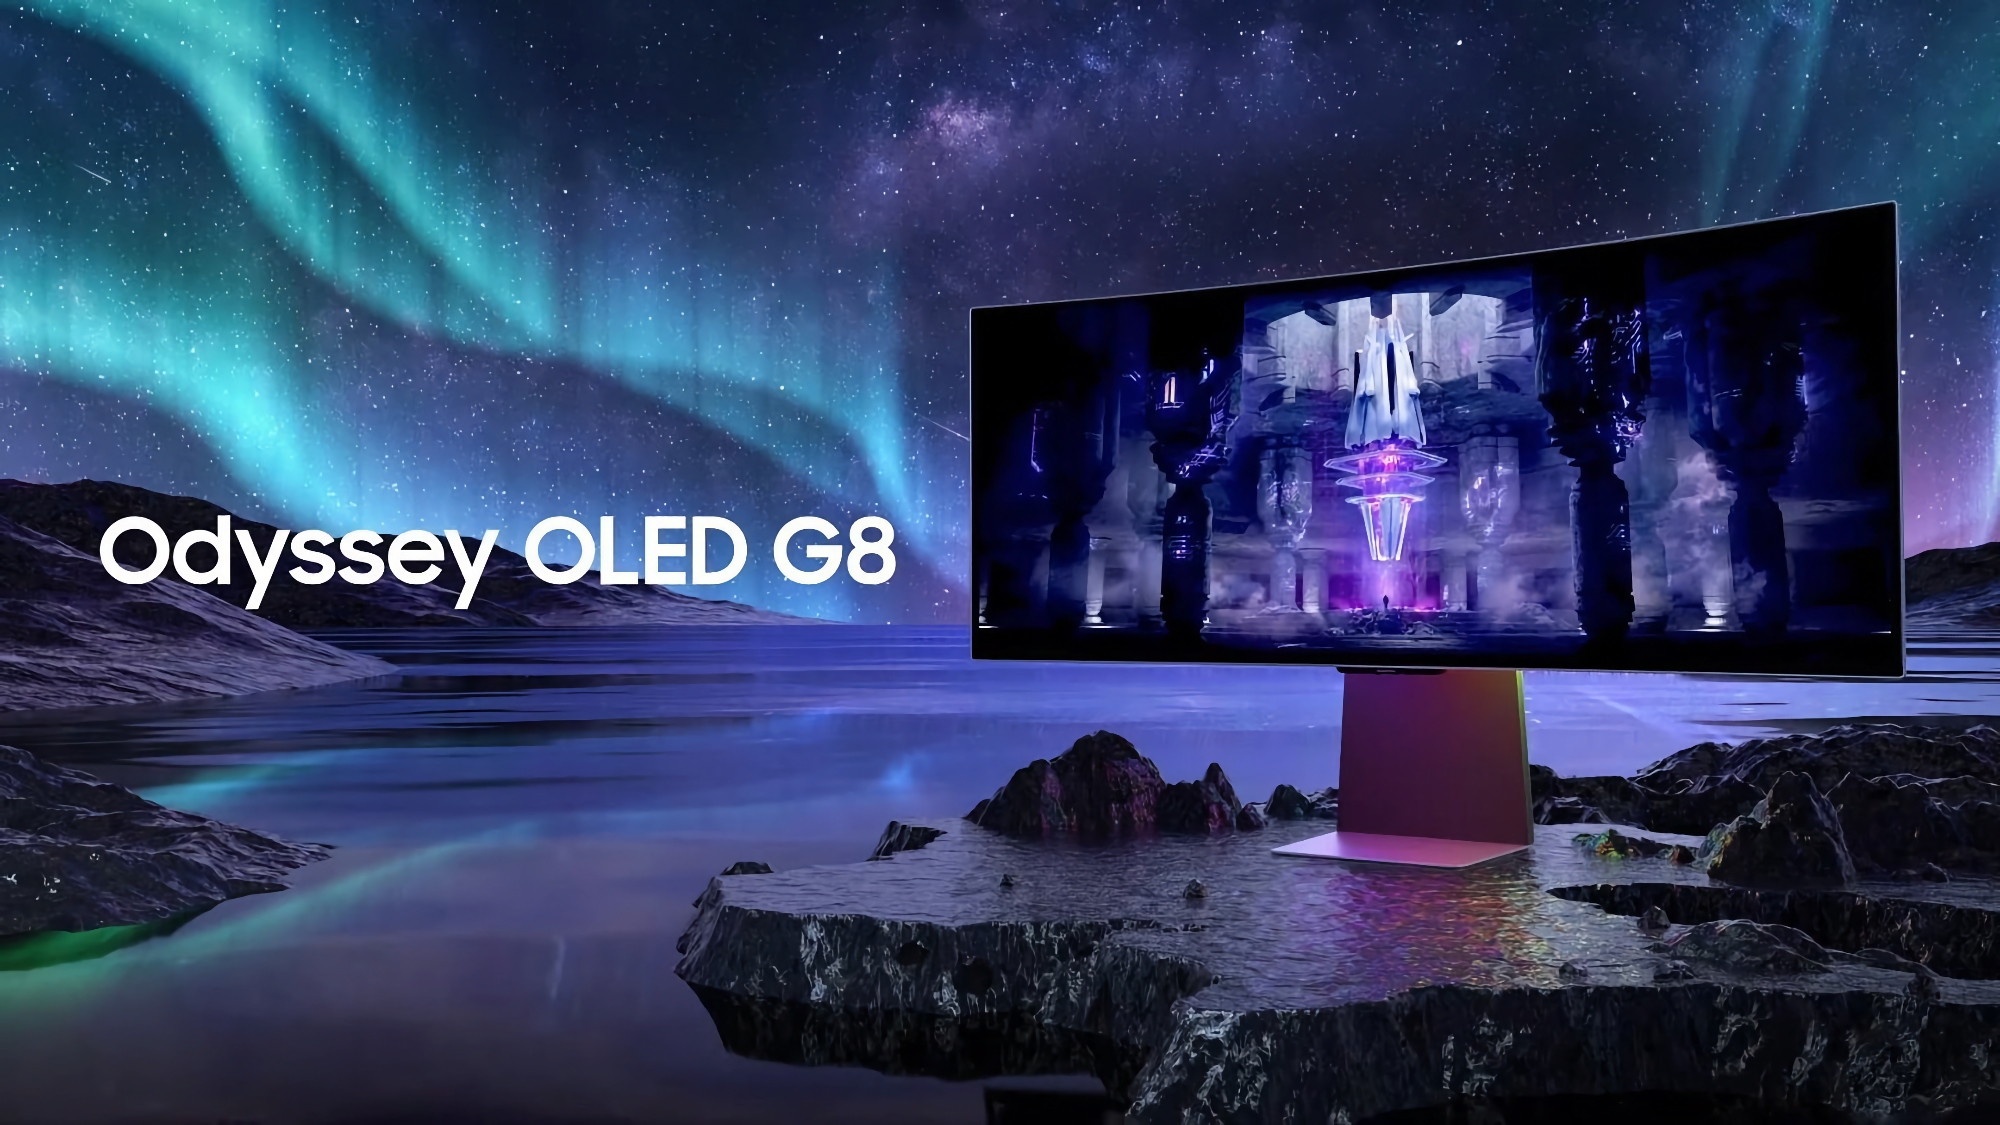 Samsung has unveiled a new Odyssey OLED G8 monitor with a 34-inch screen, 175Hz support and a price of €1,068